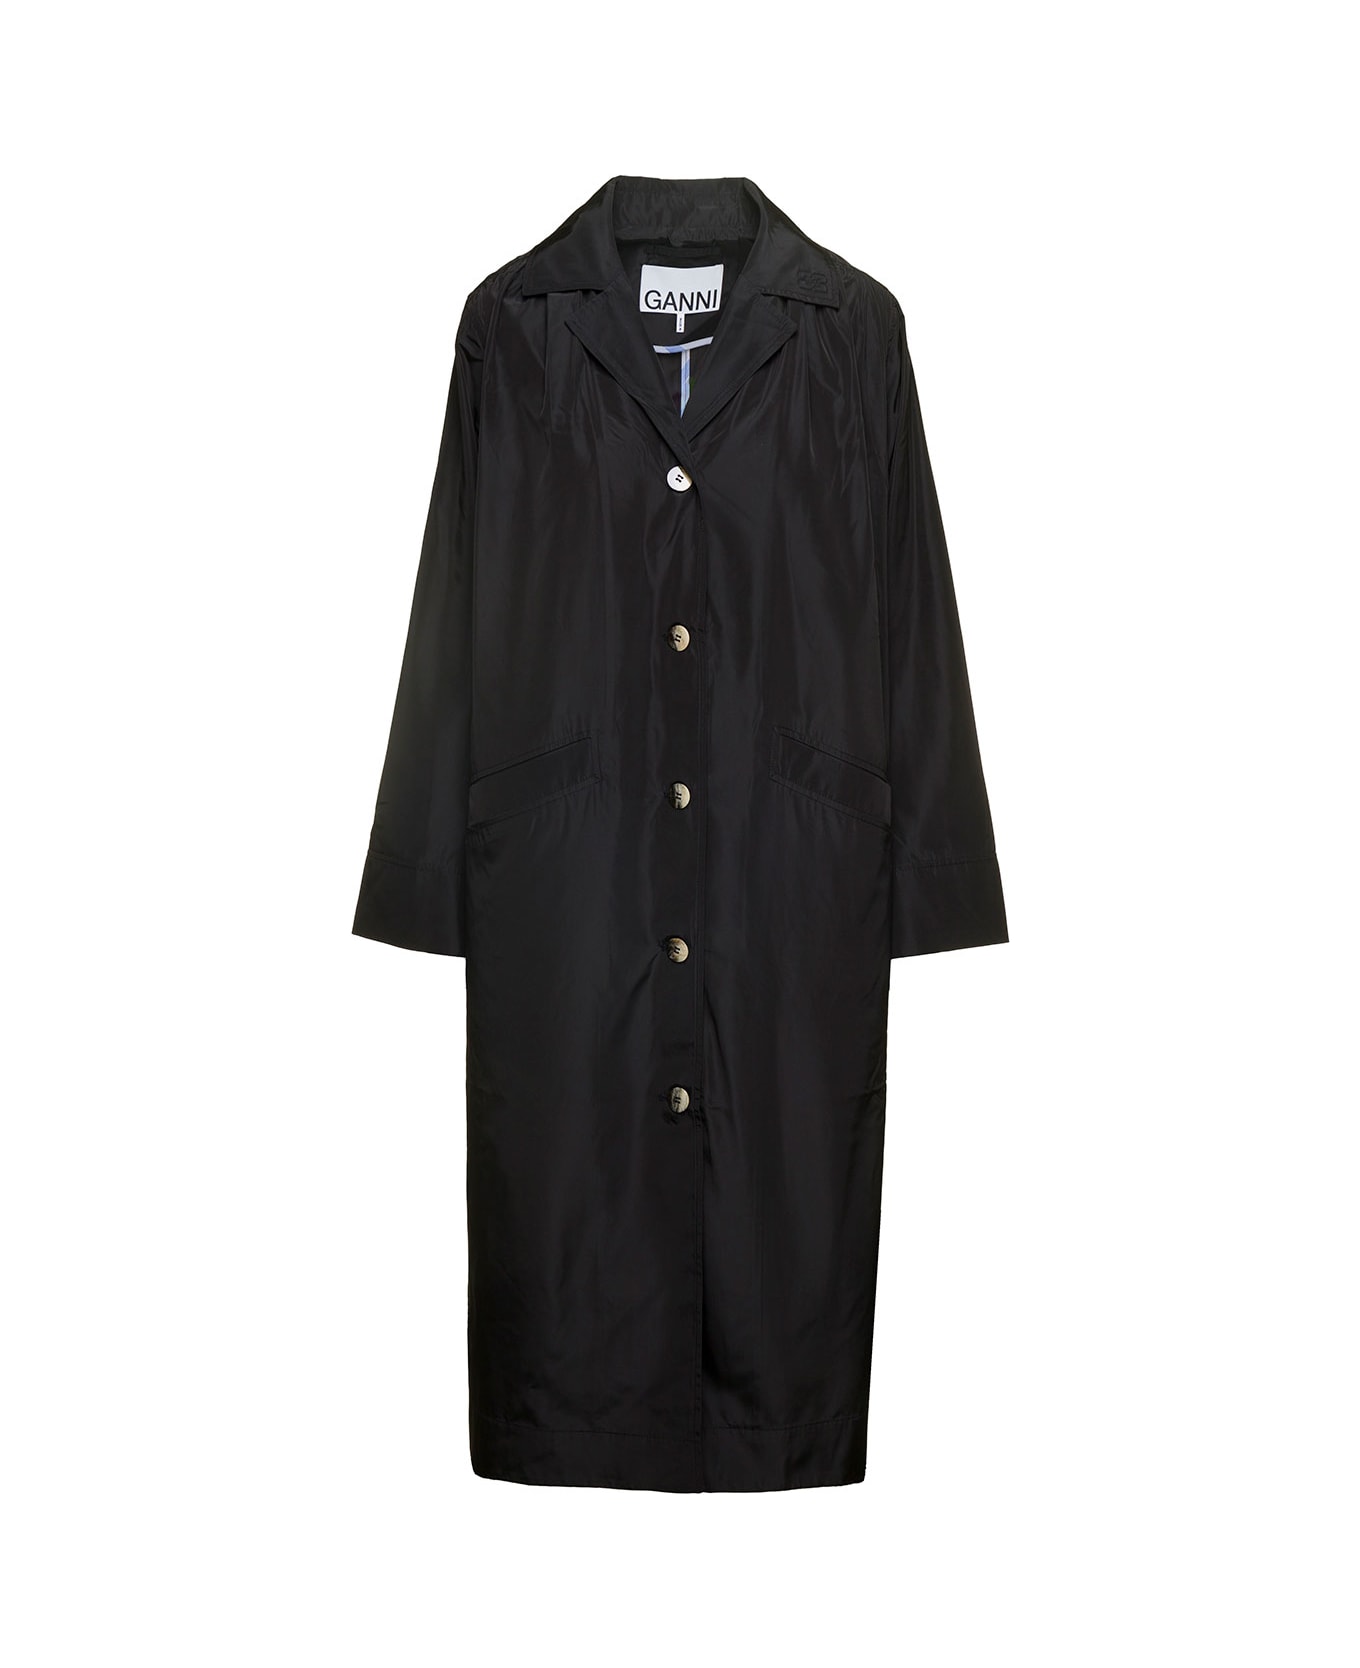 Ganni 'summer' Long Black Single-breasted Trench Coat With Buttons And Patch Pockets In Recycled Tech Fabric Woman - Black レインコート